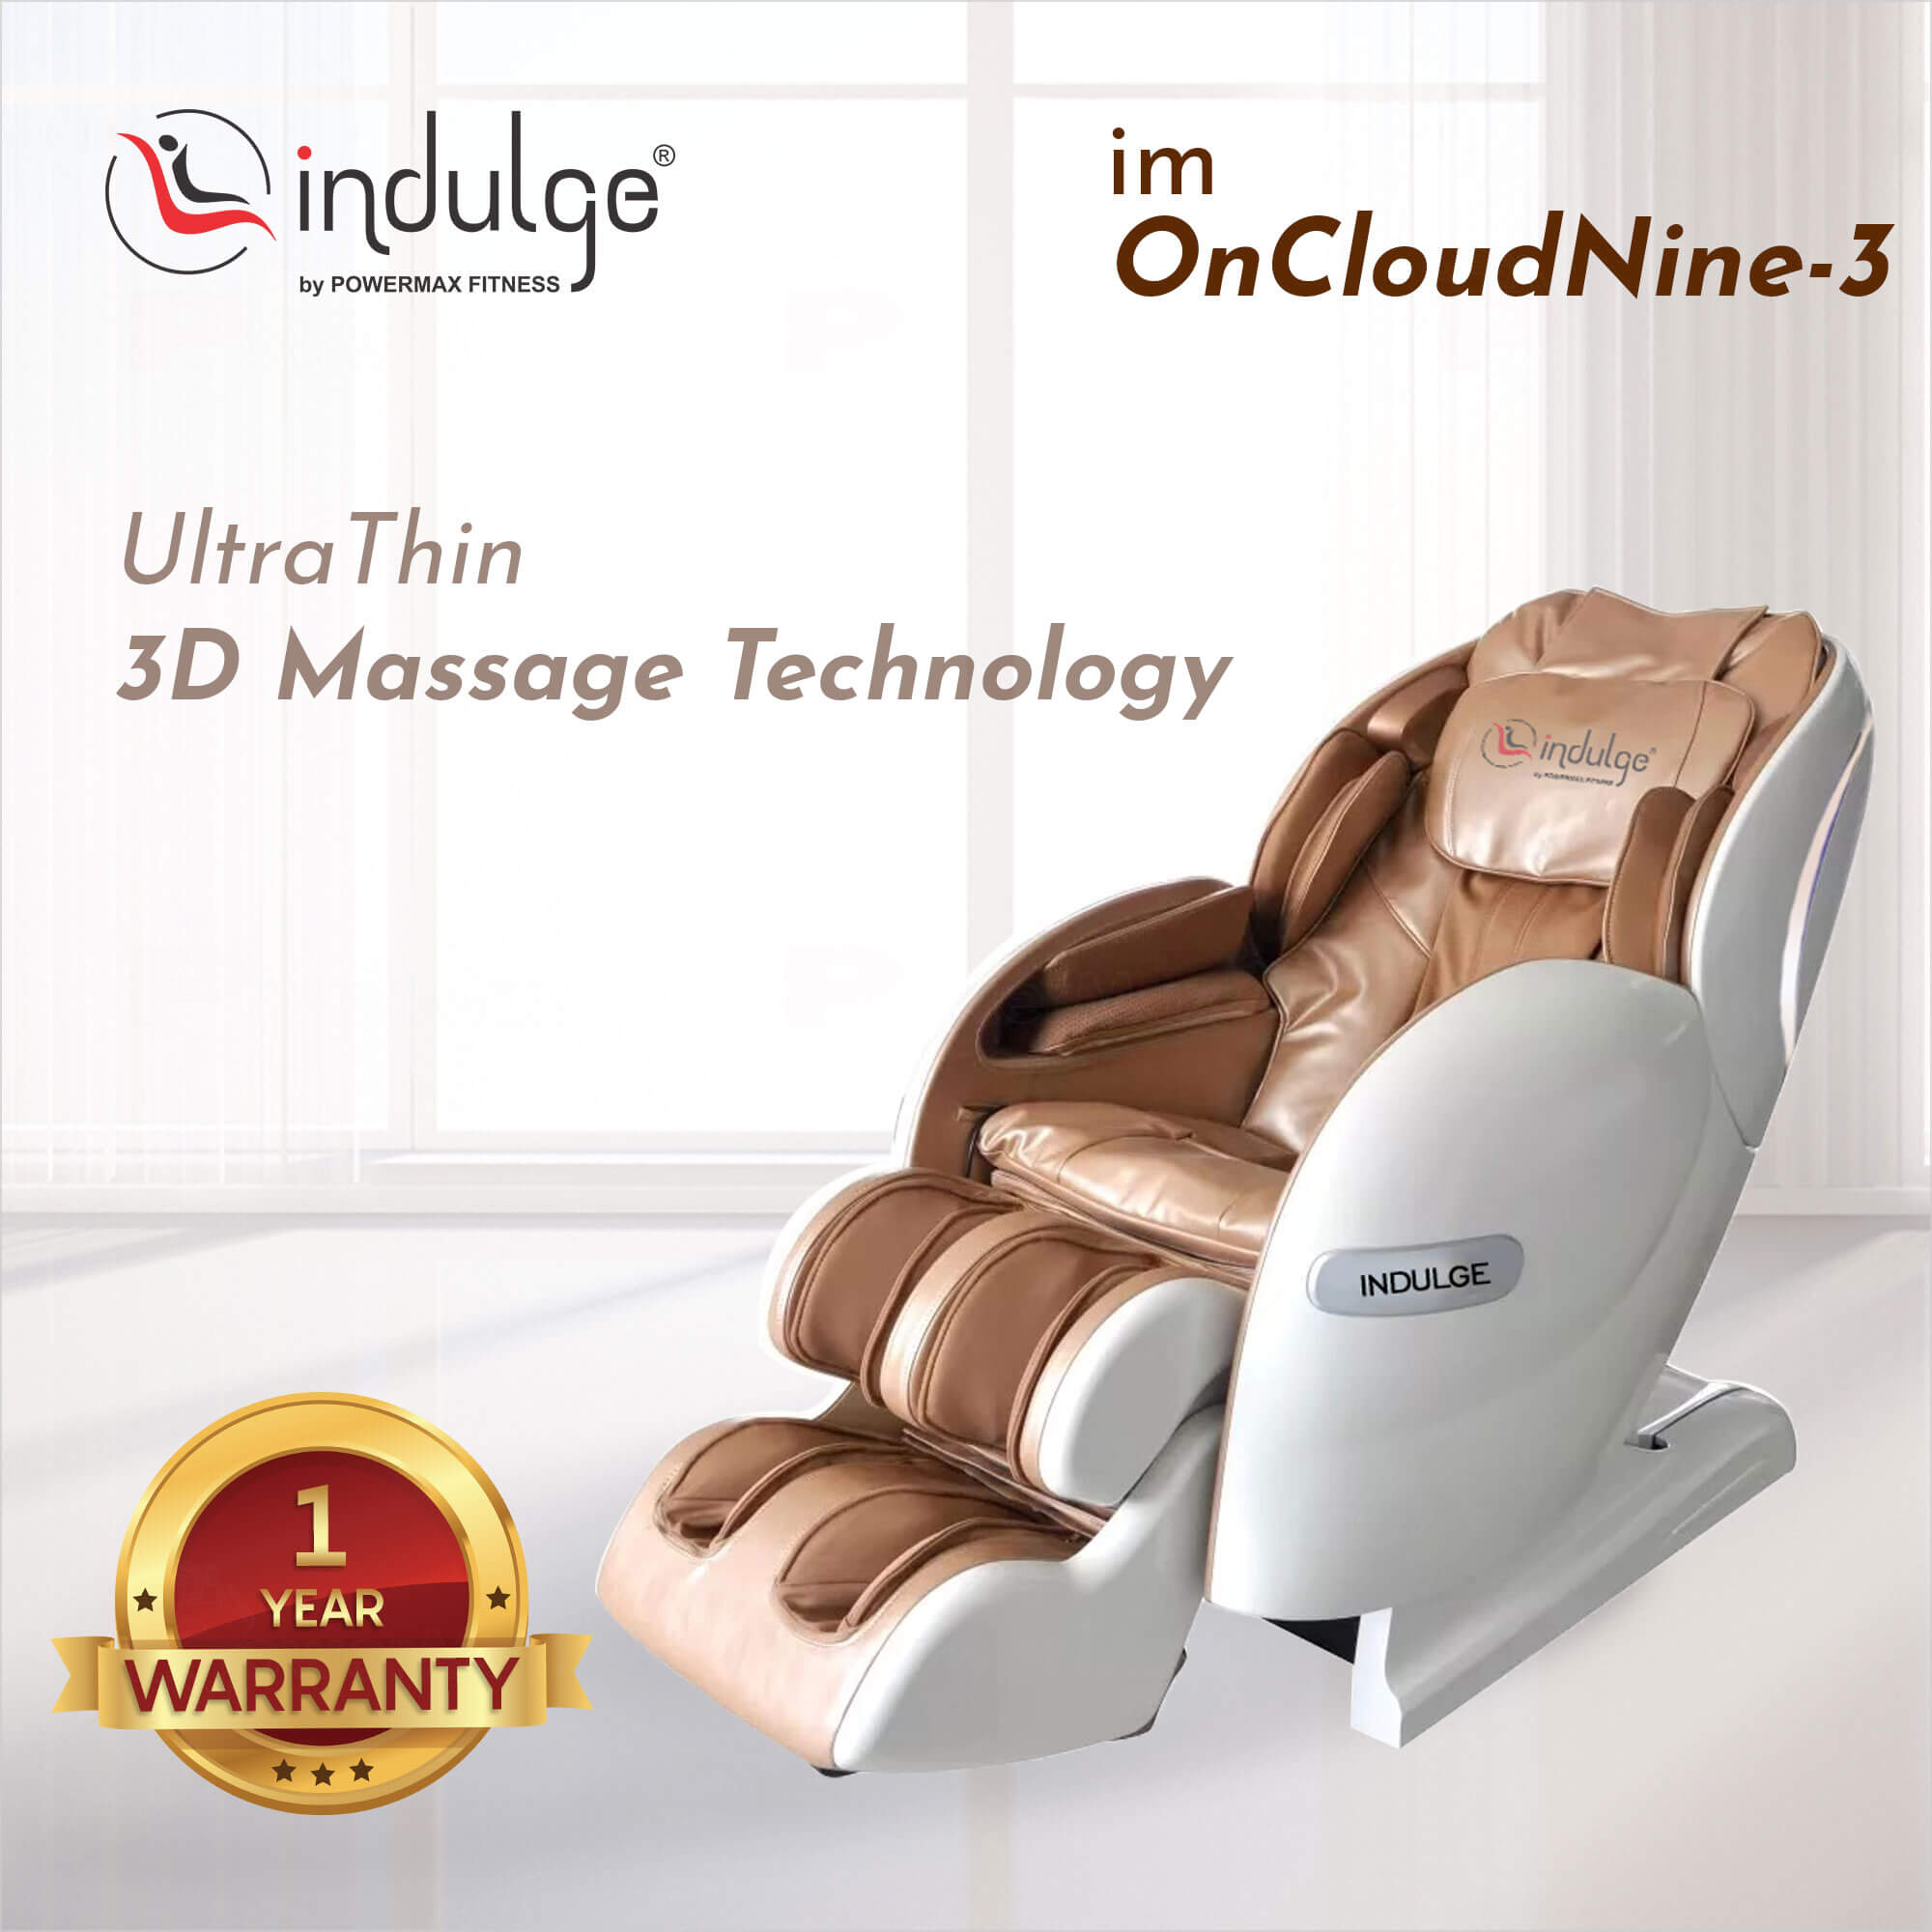 Indulge imOnCloudNine-3 Full Body Massage Chair with UltraThin 3D Massage Technology